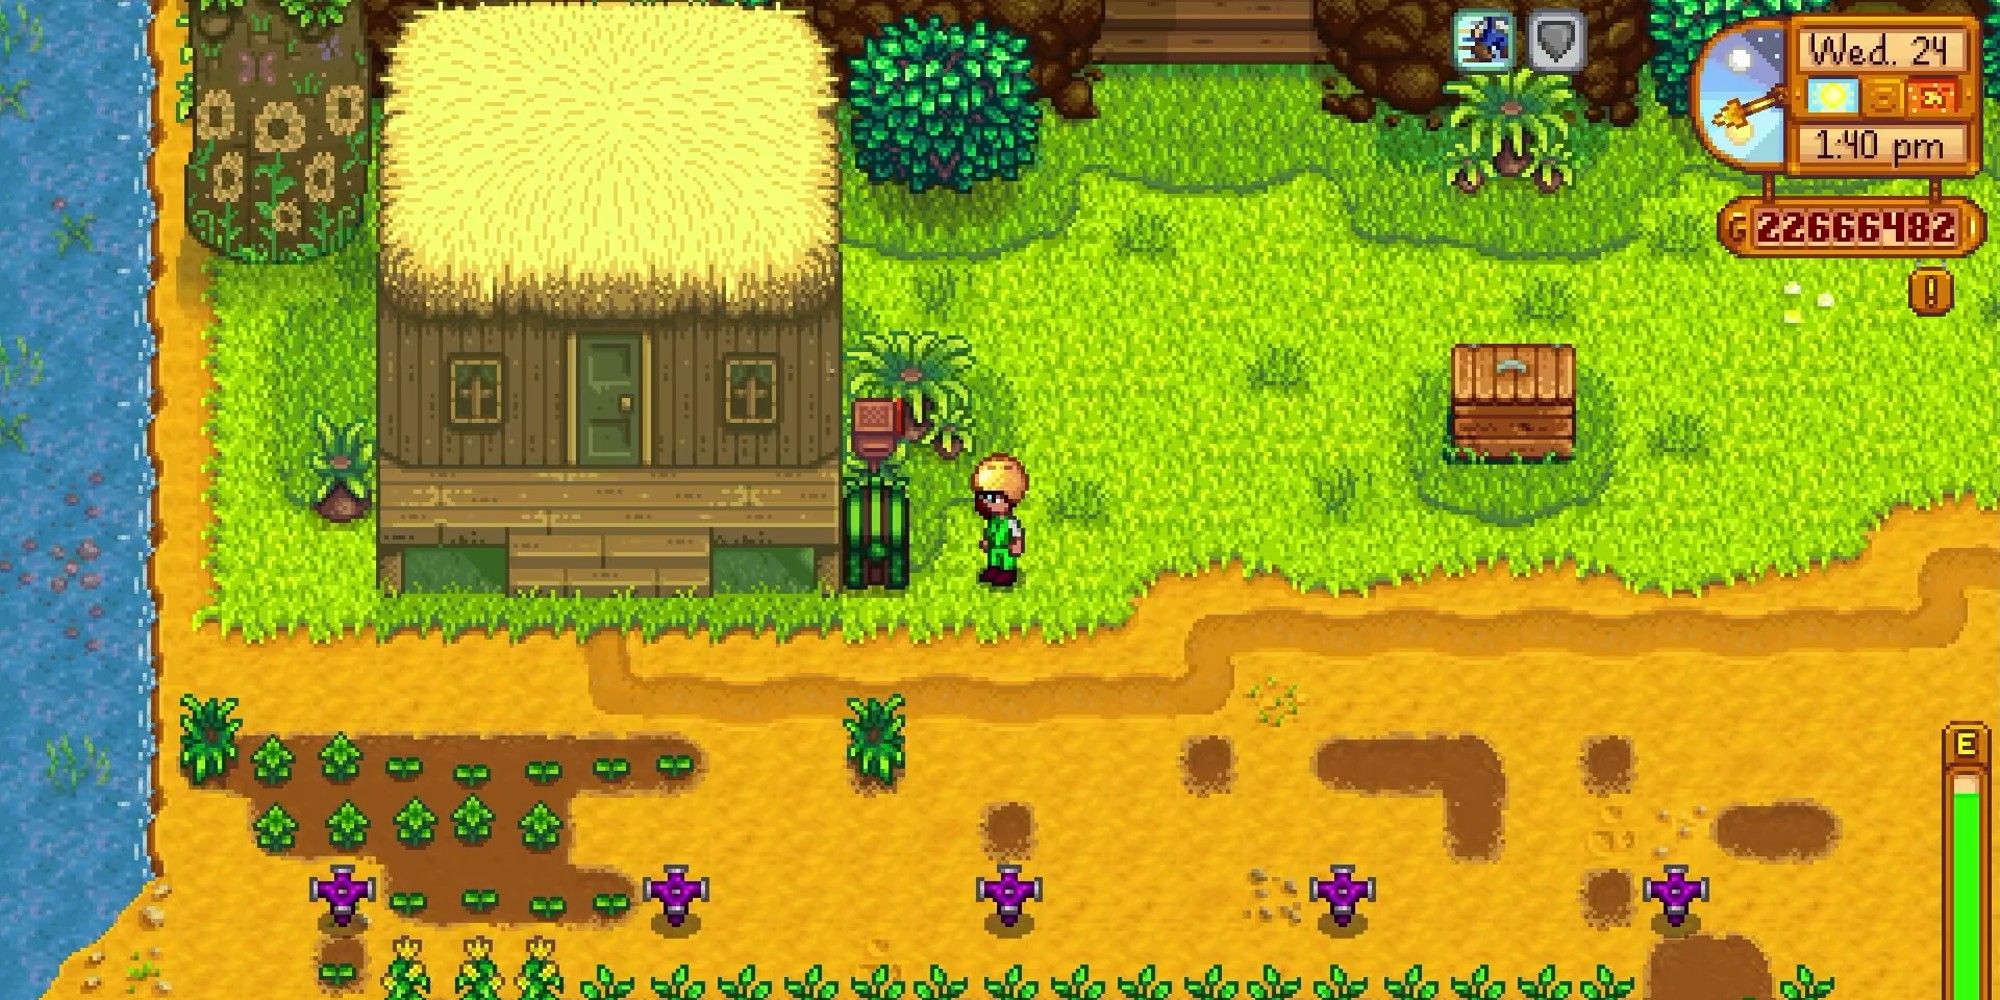 Stardew Valley player next to a placed junimo chest